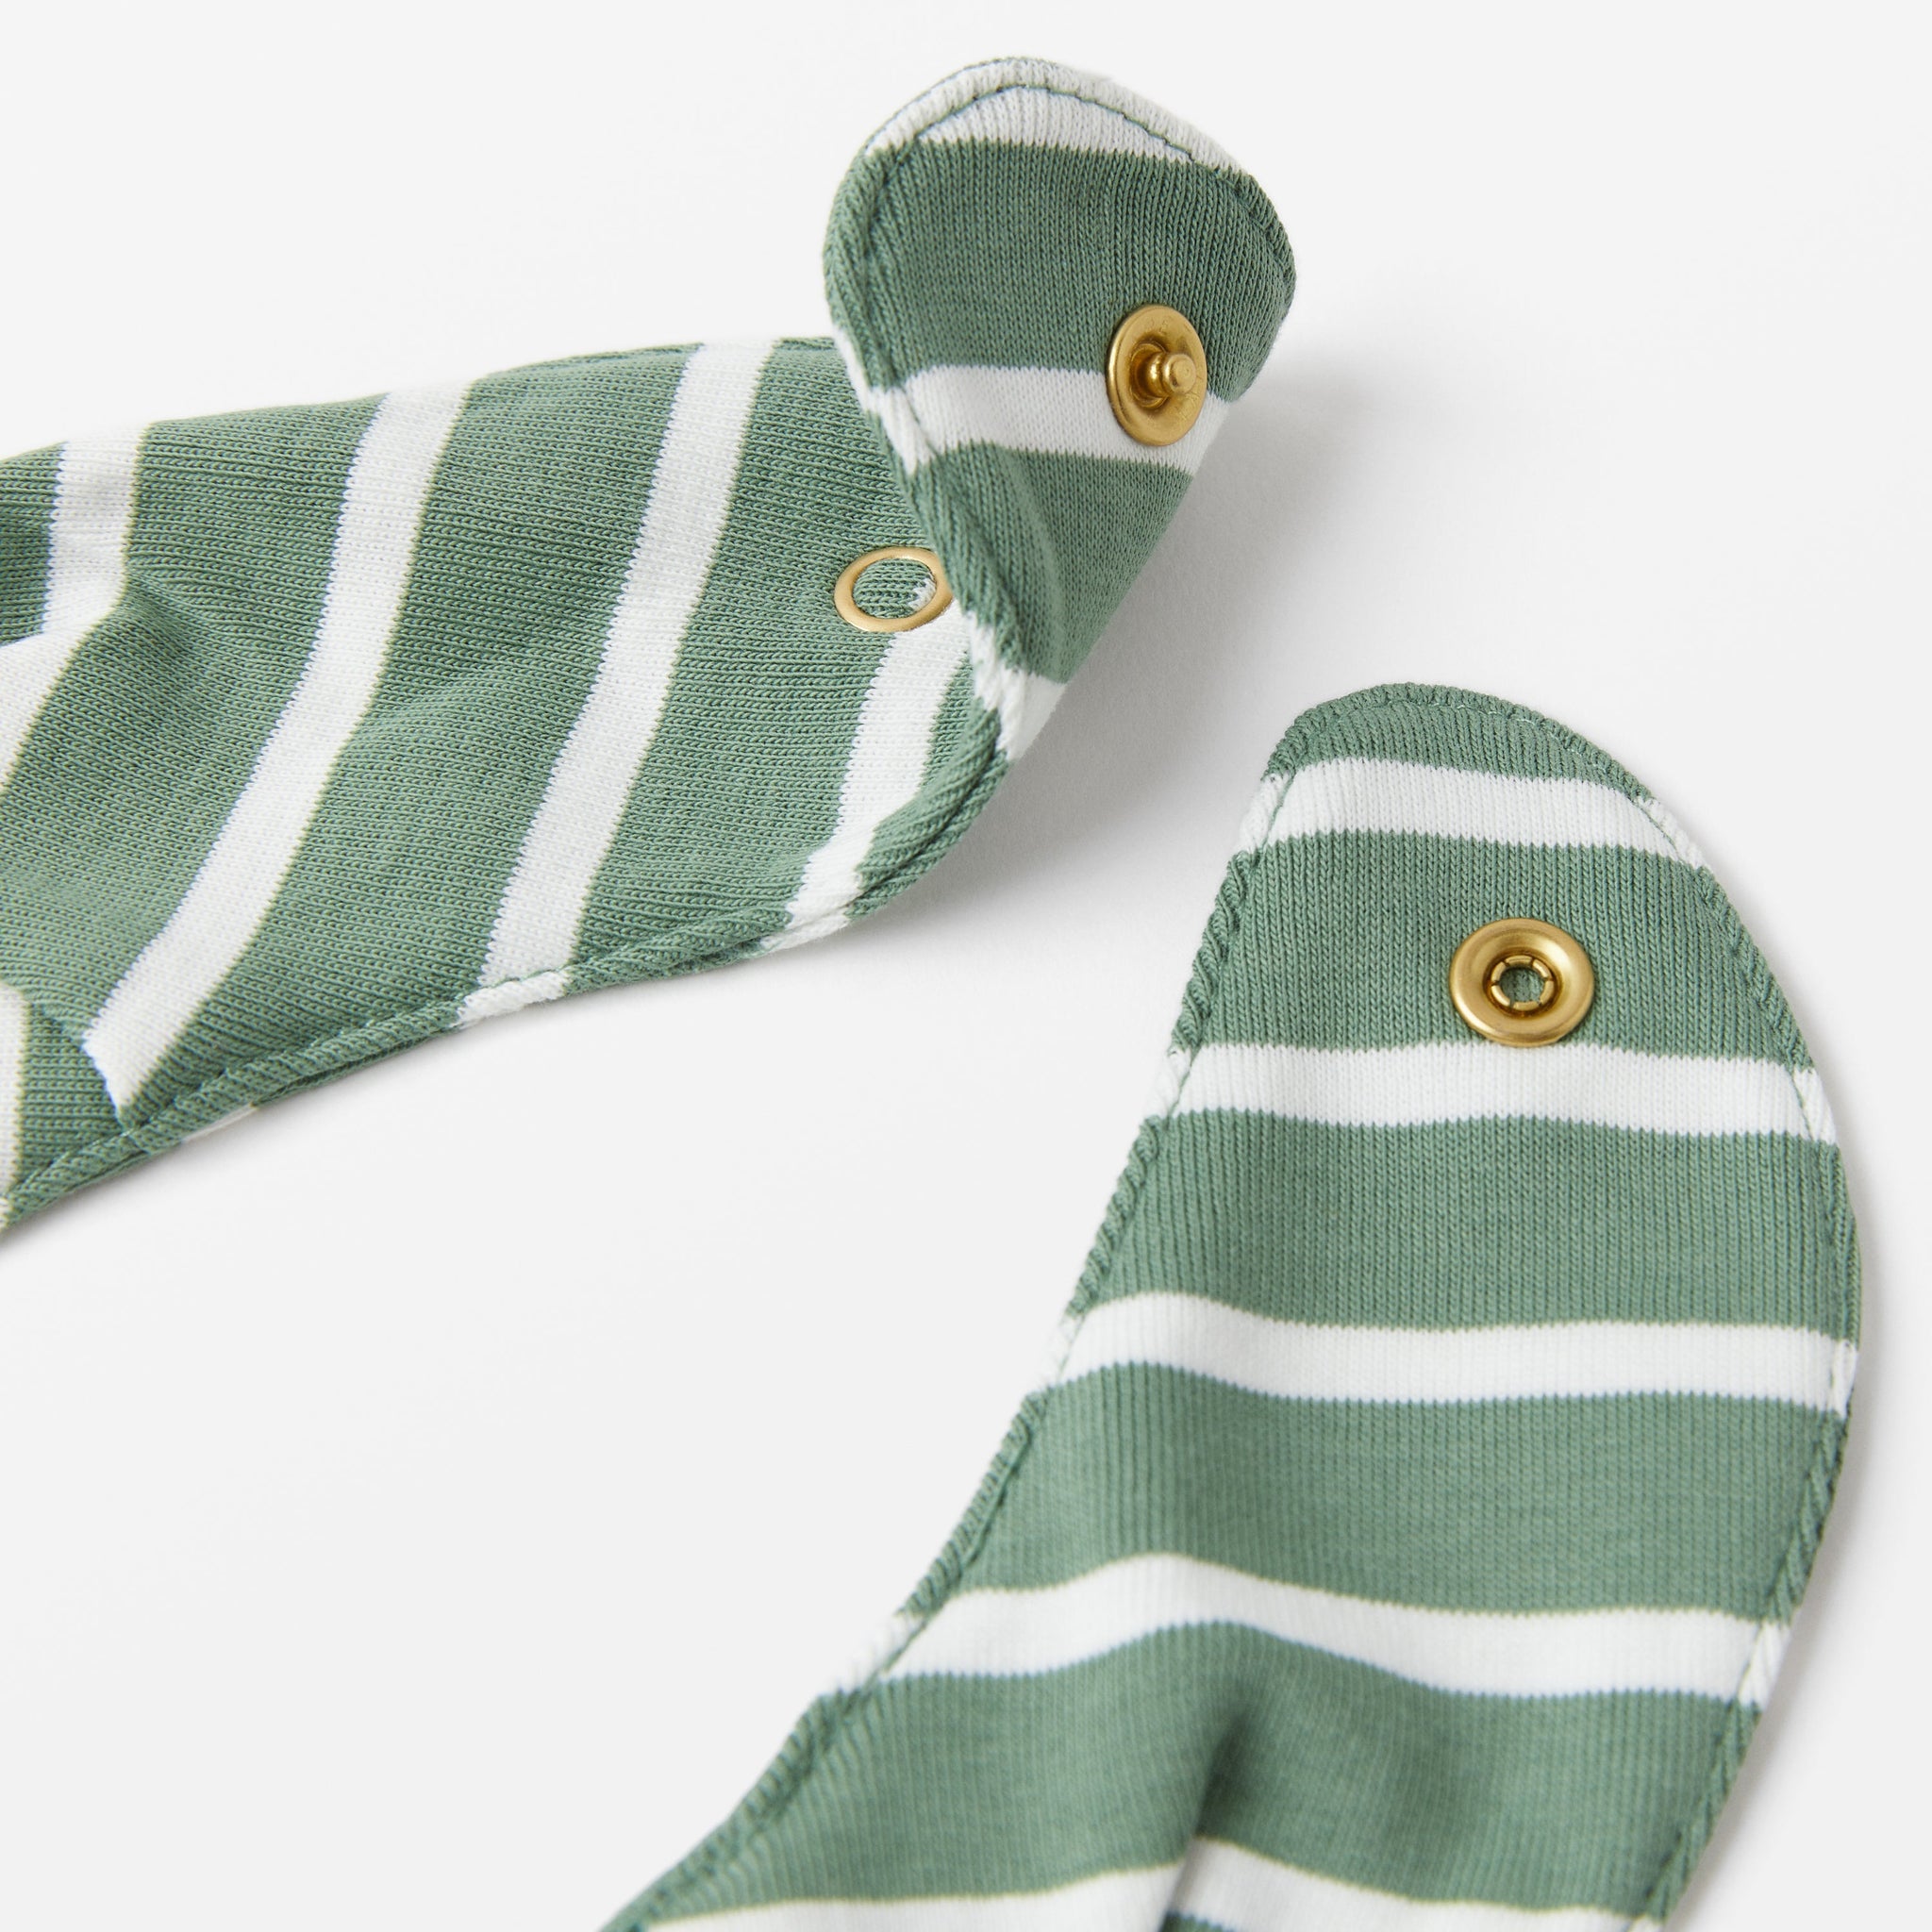 Organic Cotton Green Baby Bib from the Polarn O. Pyret Kidswear collection. Nordic kids clothes made from sustainable sources.